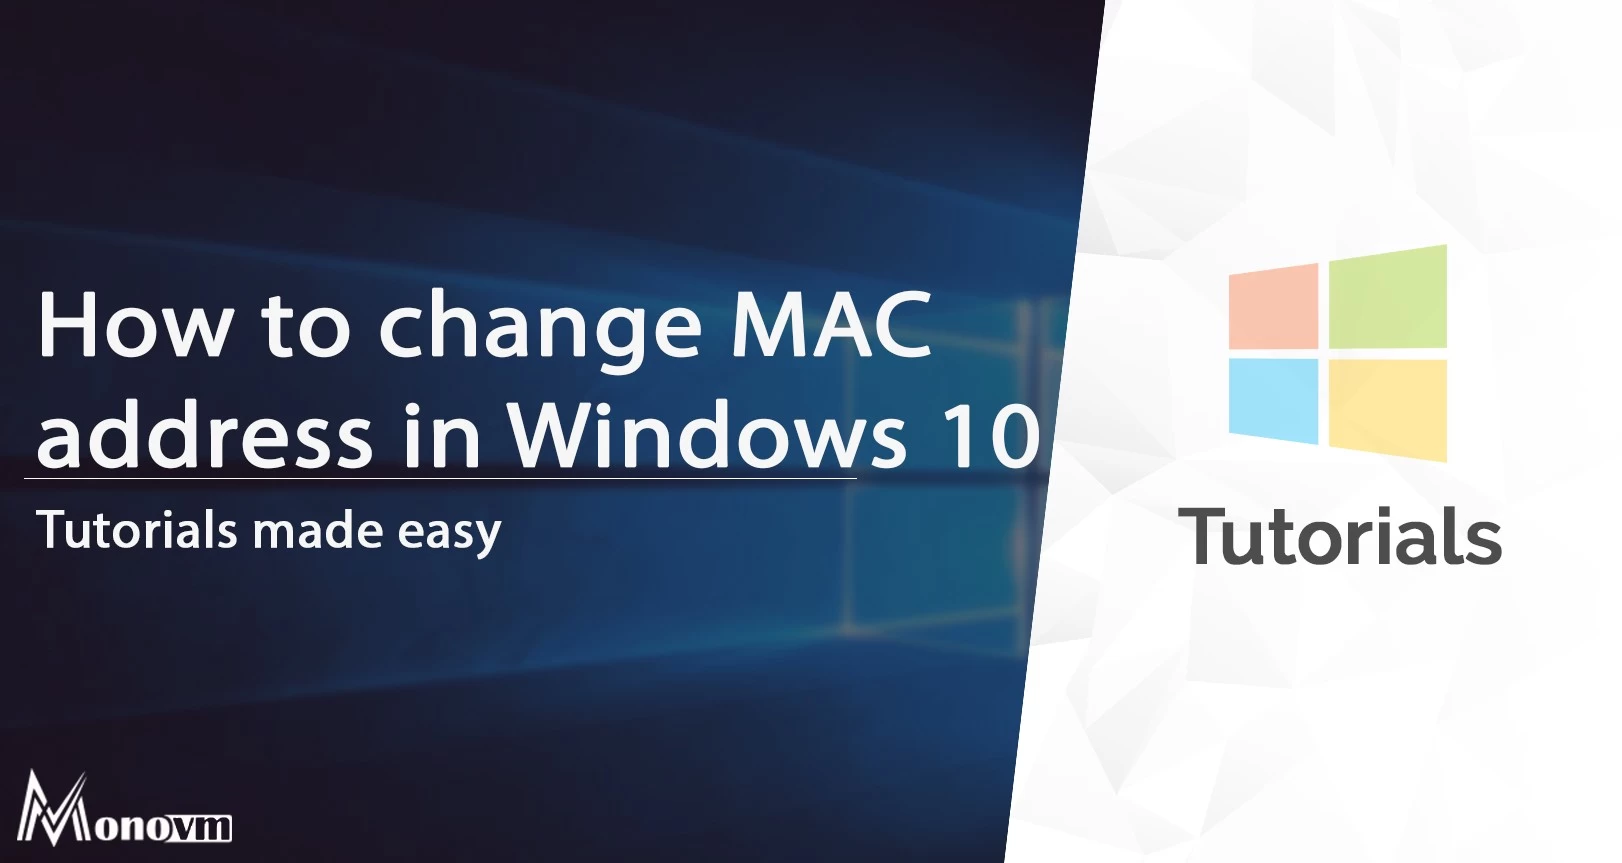 How to Change MAC Address in Windows 10? [Step by Step Guide]